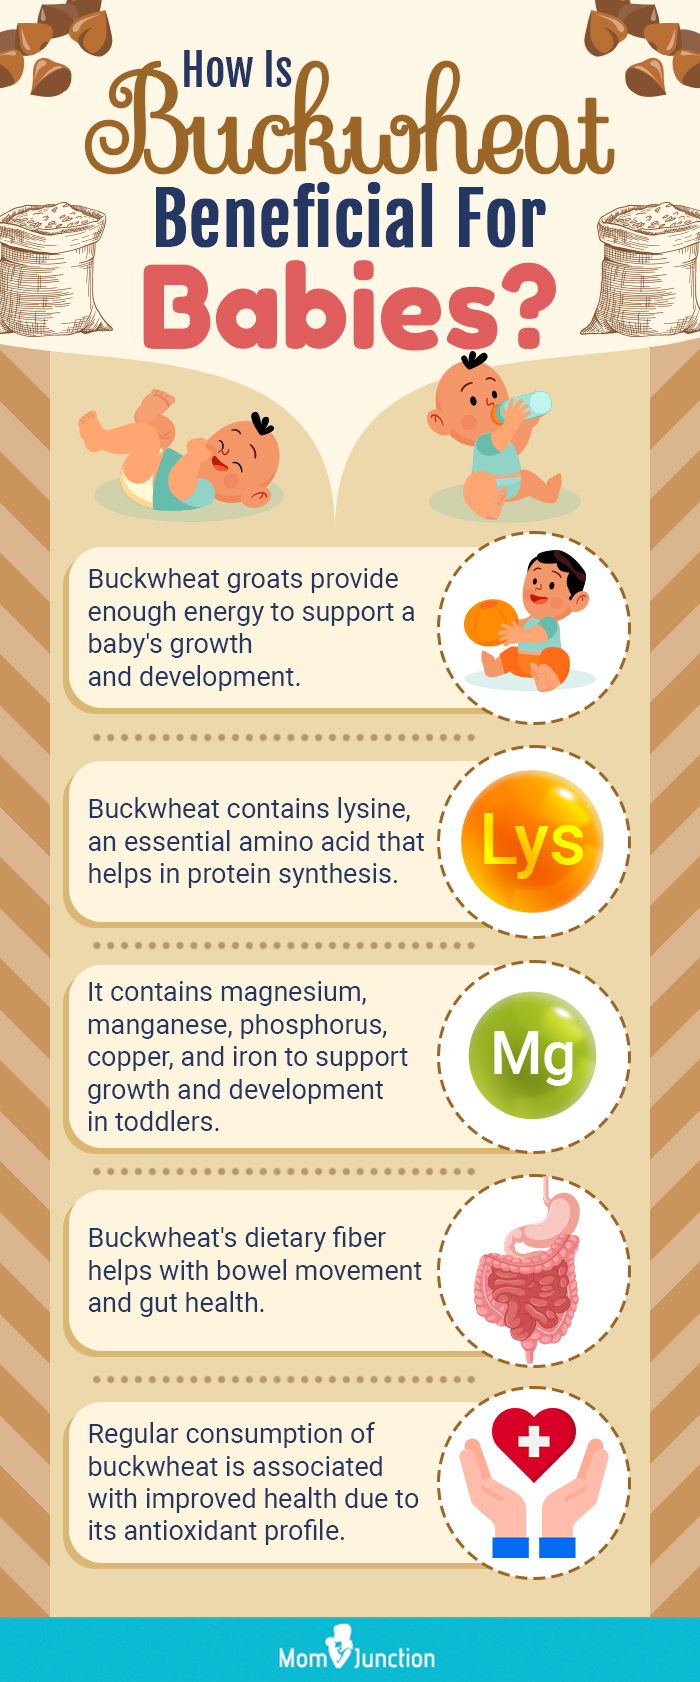 how is buckwheat beneficial for babies (infographic)